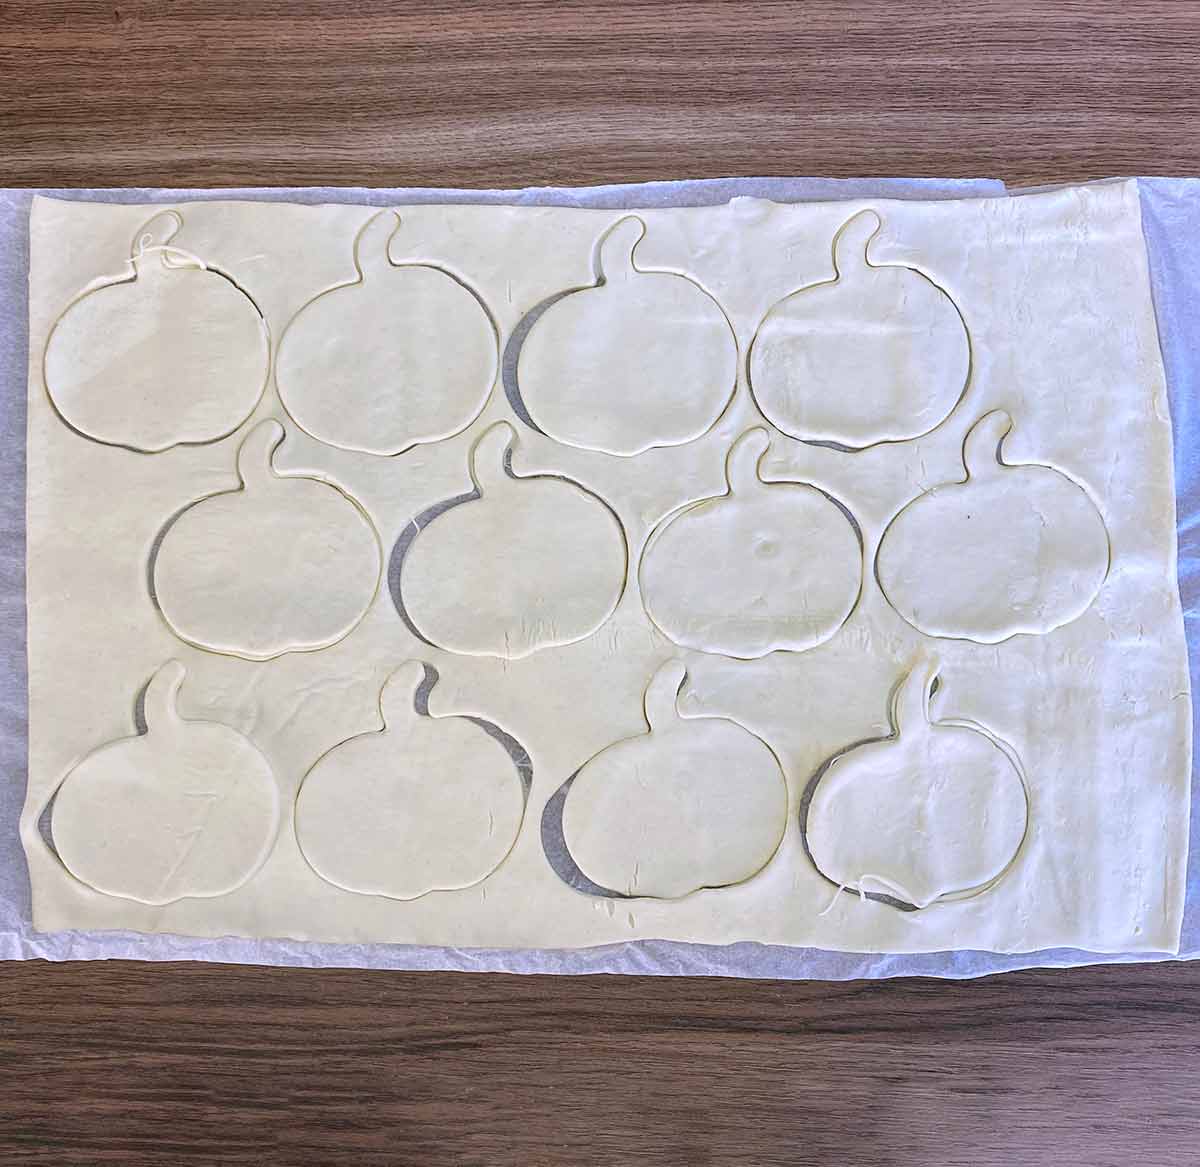 A sheet of pastry with pumpkin shapes cut into it.